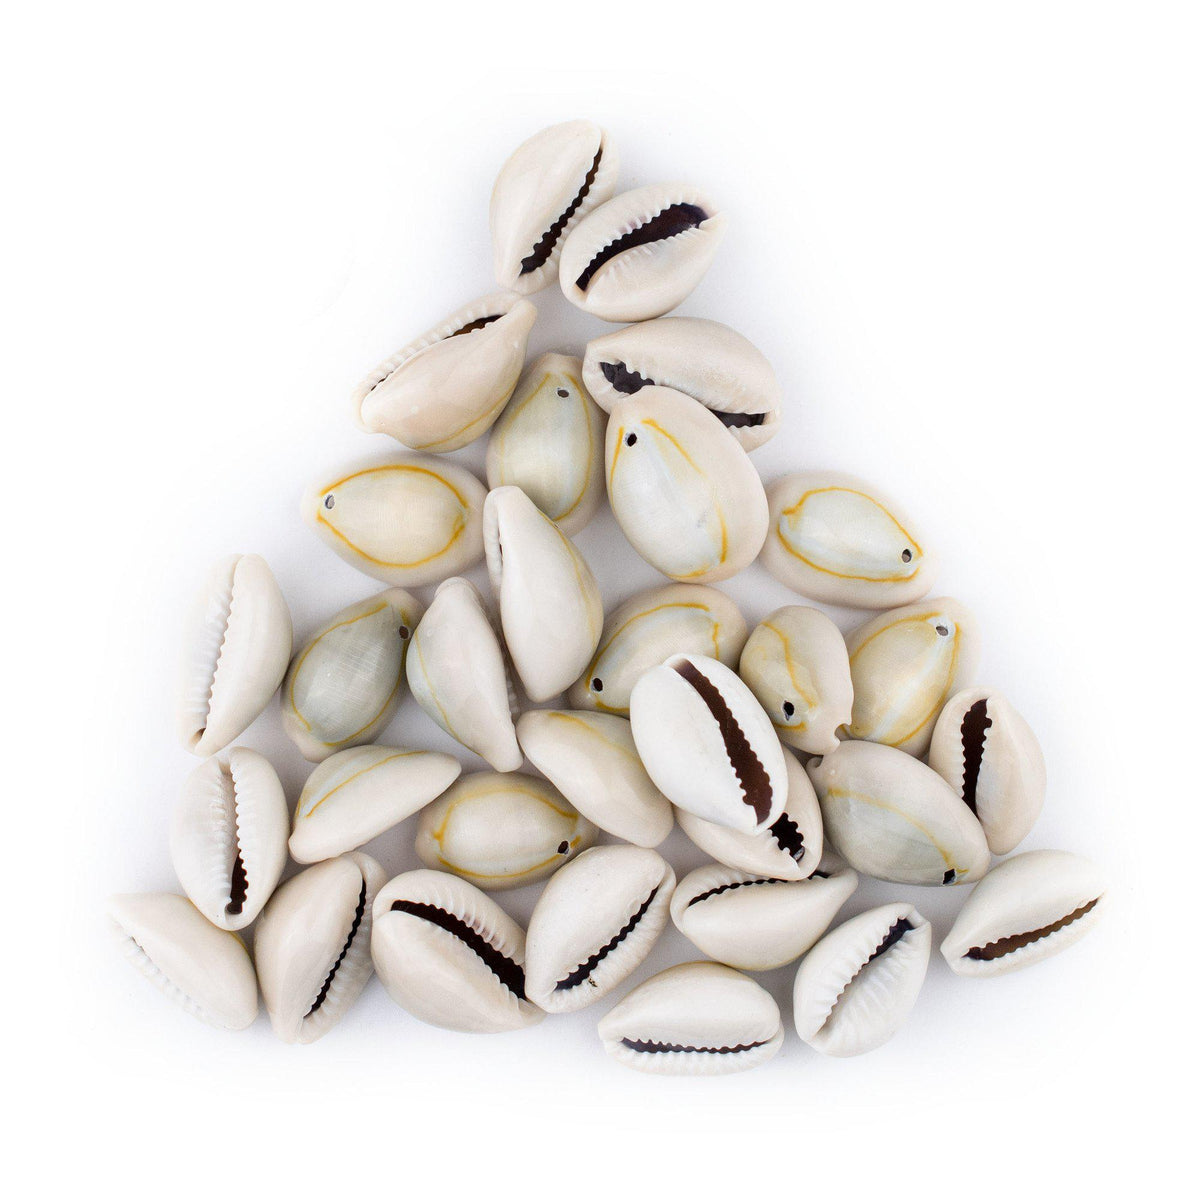 Bead, cowrie shell (natural), 15x7mm-25x12mm double-drilled, Mohs hardness  3-1/2. Sold per 130-gram pkg. - Fire Mountain Gems and Beads